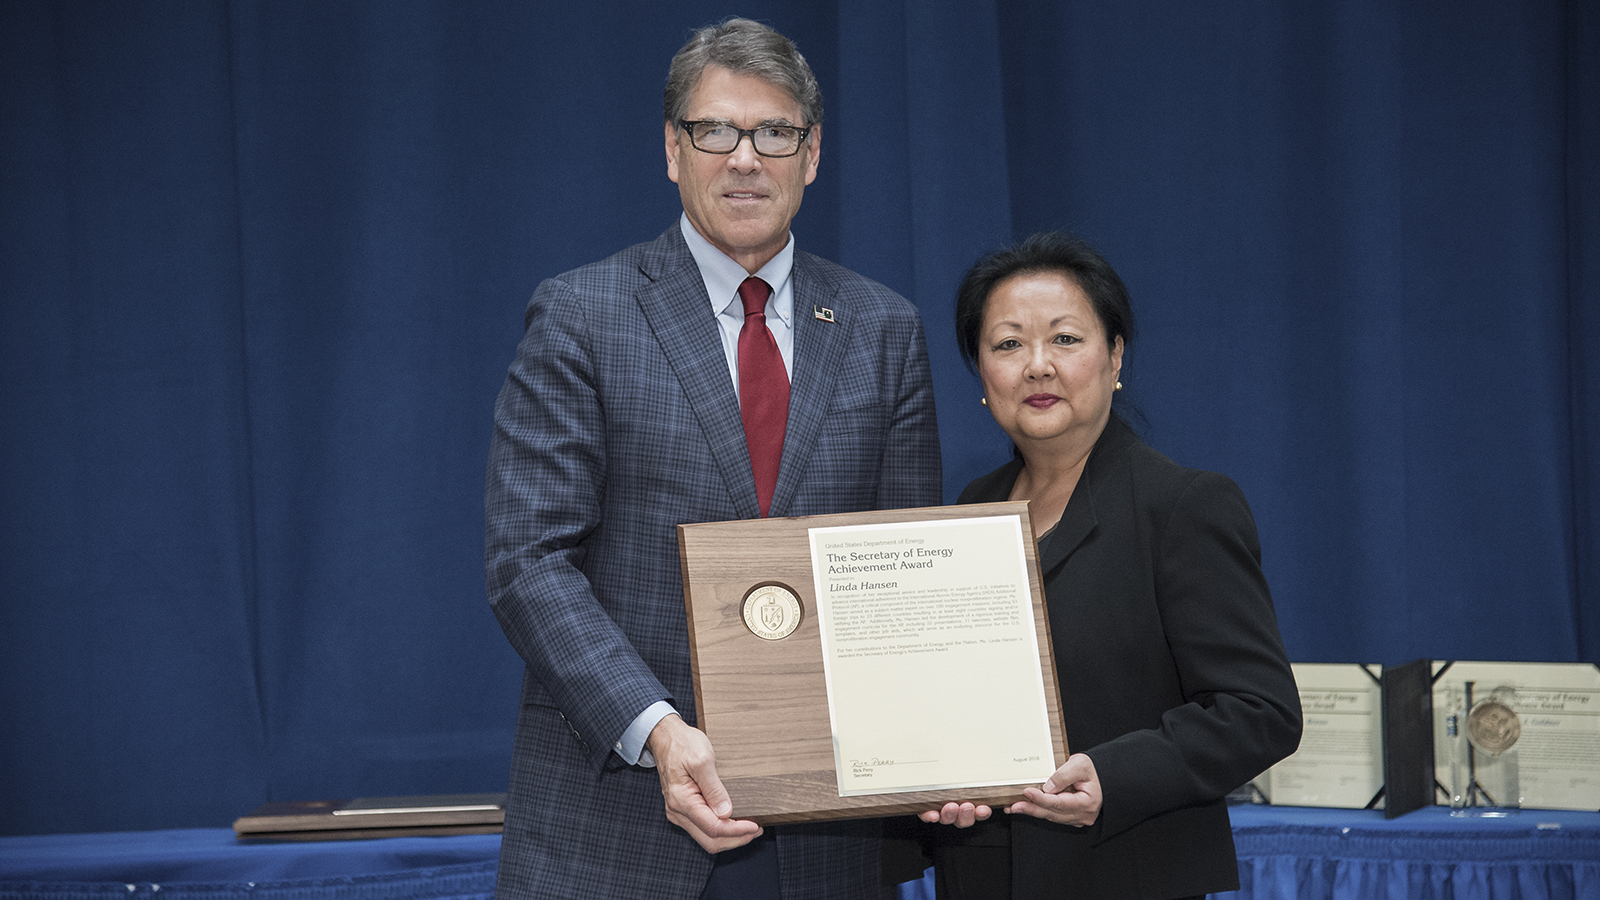 Linda Hansen receives the Secretary of Energy’s Achievement Award from Secretary of Energy Rick Perry at the Secretary’s Honor Awards ceremony in Washington, D.C., on August 29. (Image by U.S. Department of Energy.)